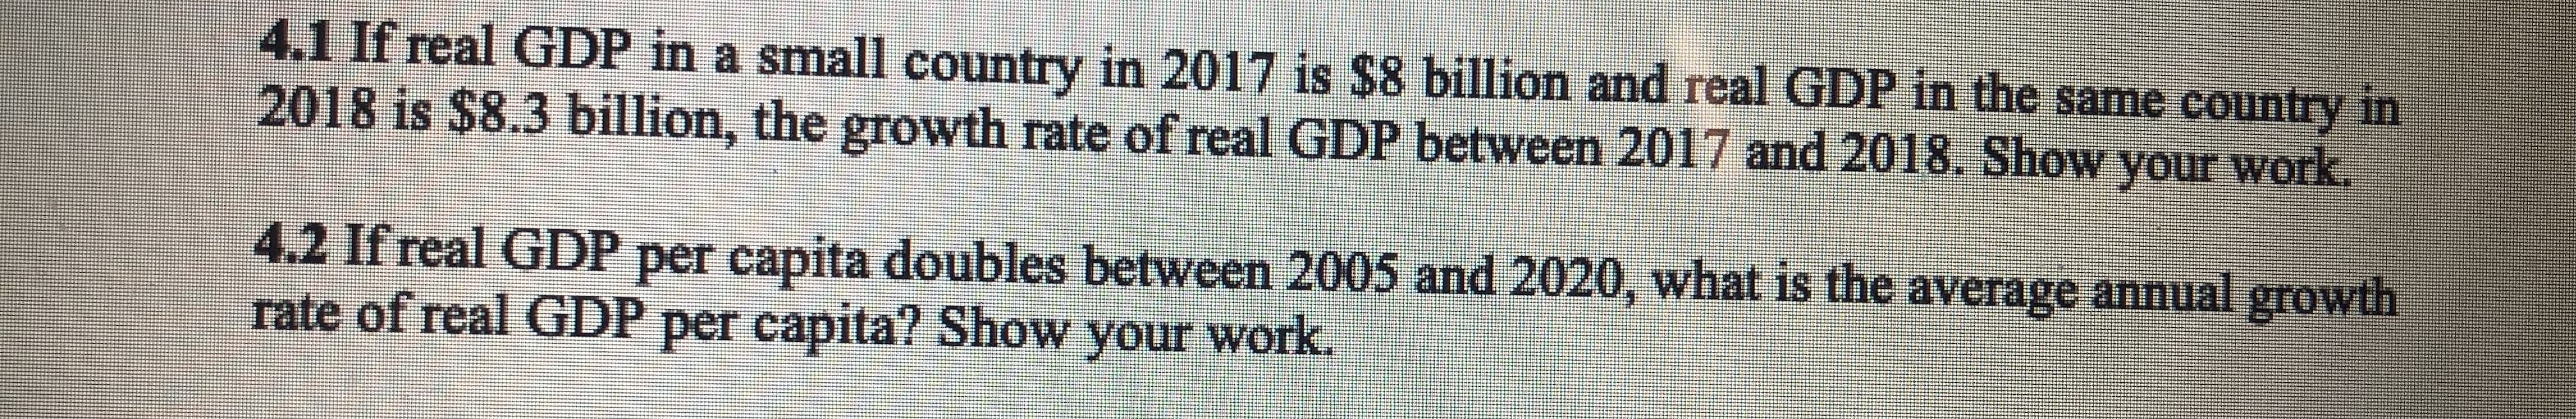 4.1 If real GDP in a small country in 2017 is $8 billion and real GDP in the same country in
2018 is $8.3 billion, the growth rate of real GDP between 2017 and 2018. Show your work
4.2 If real GDP per capita doubles between 2005 and 2020, what is the average annual growth
rate of real GDP per capita? Show your work.
